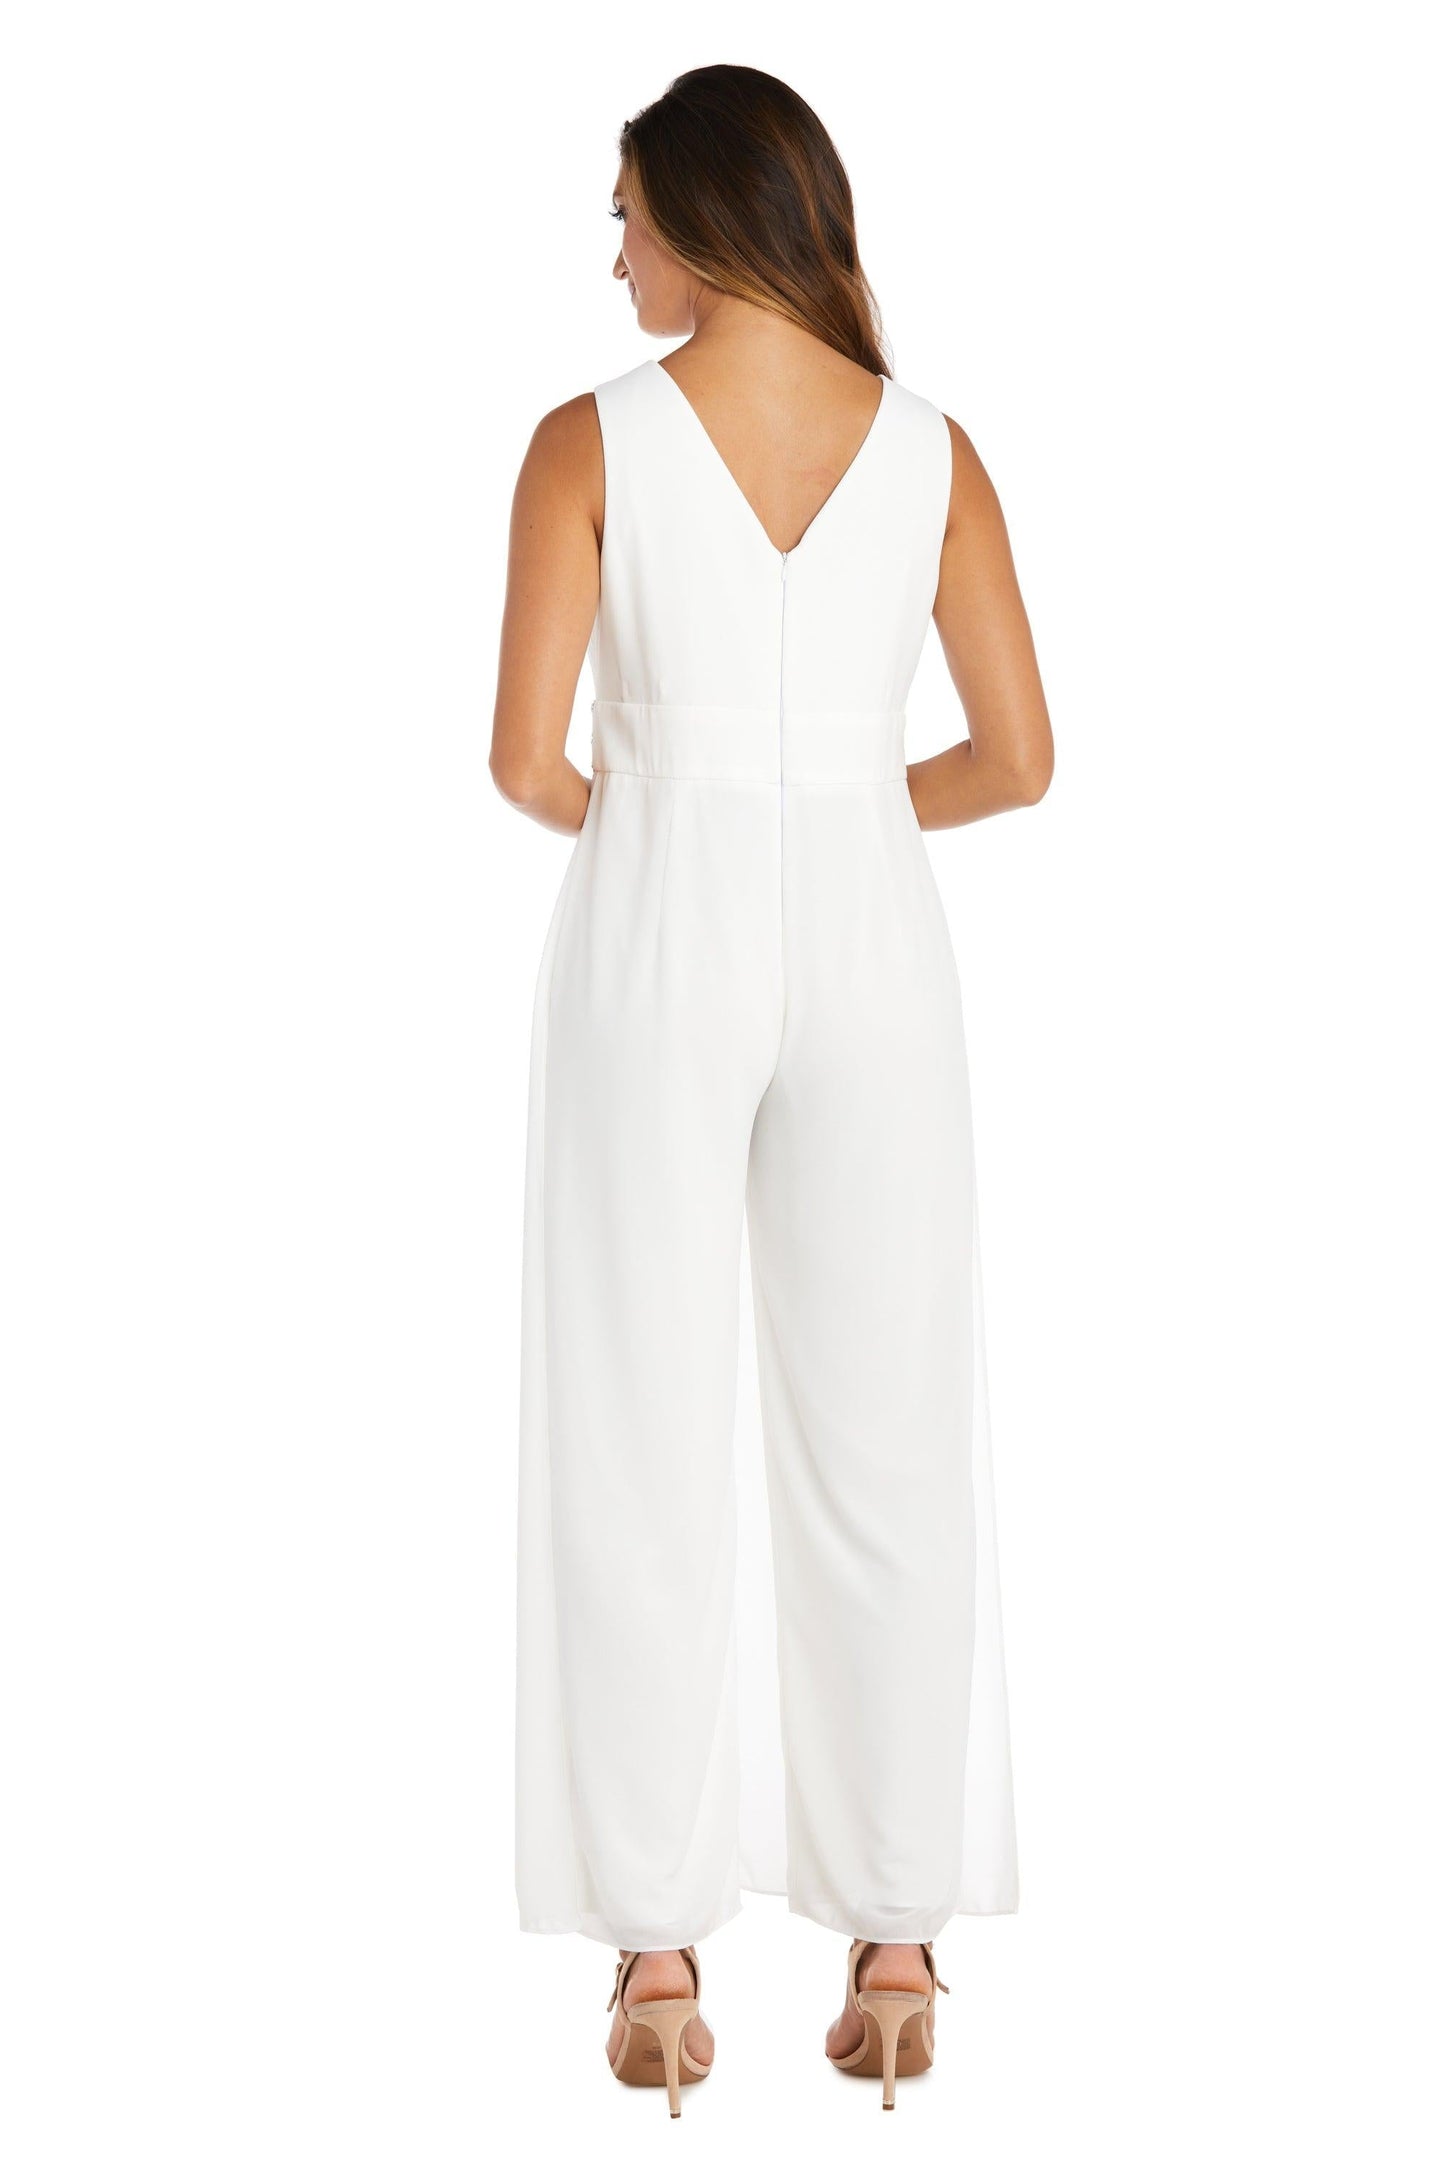 R&M Richards Long Sleeveless Formal Jumpsuit Sale - The Dress Outlet